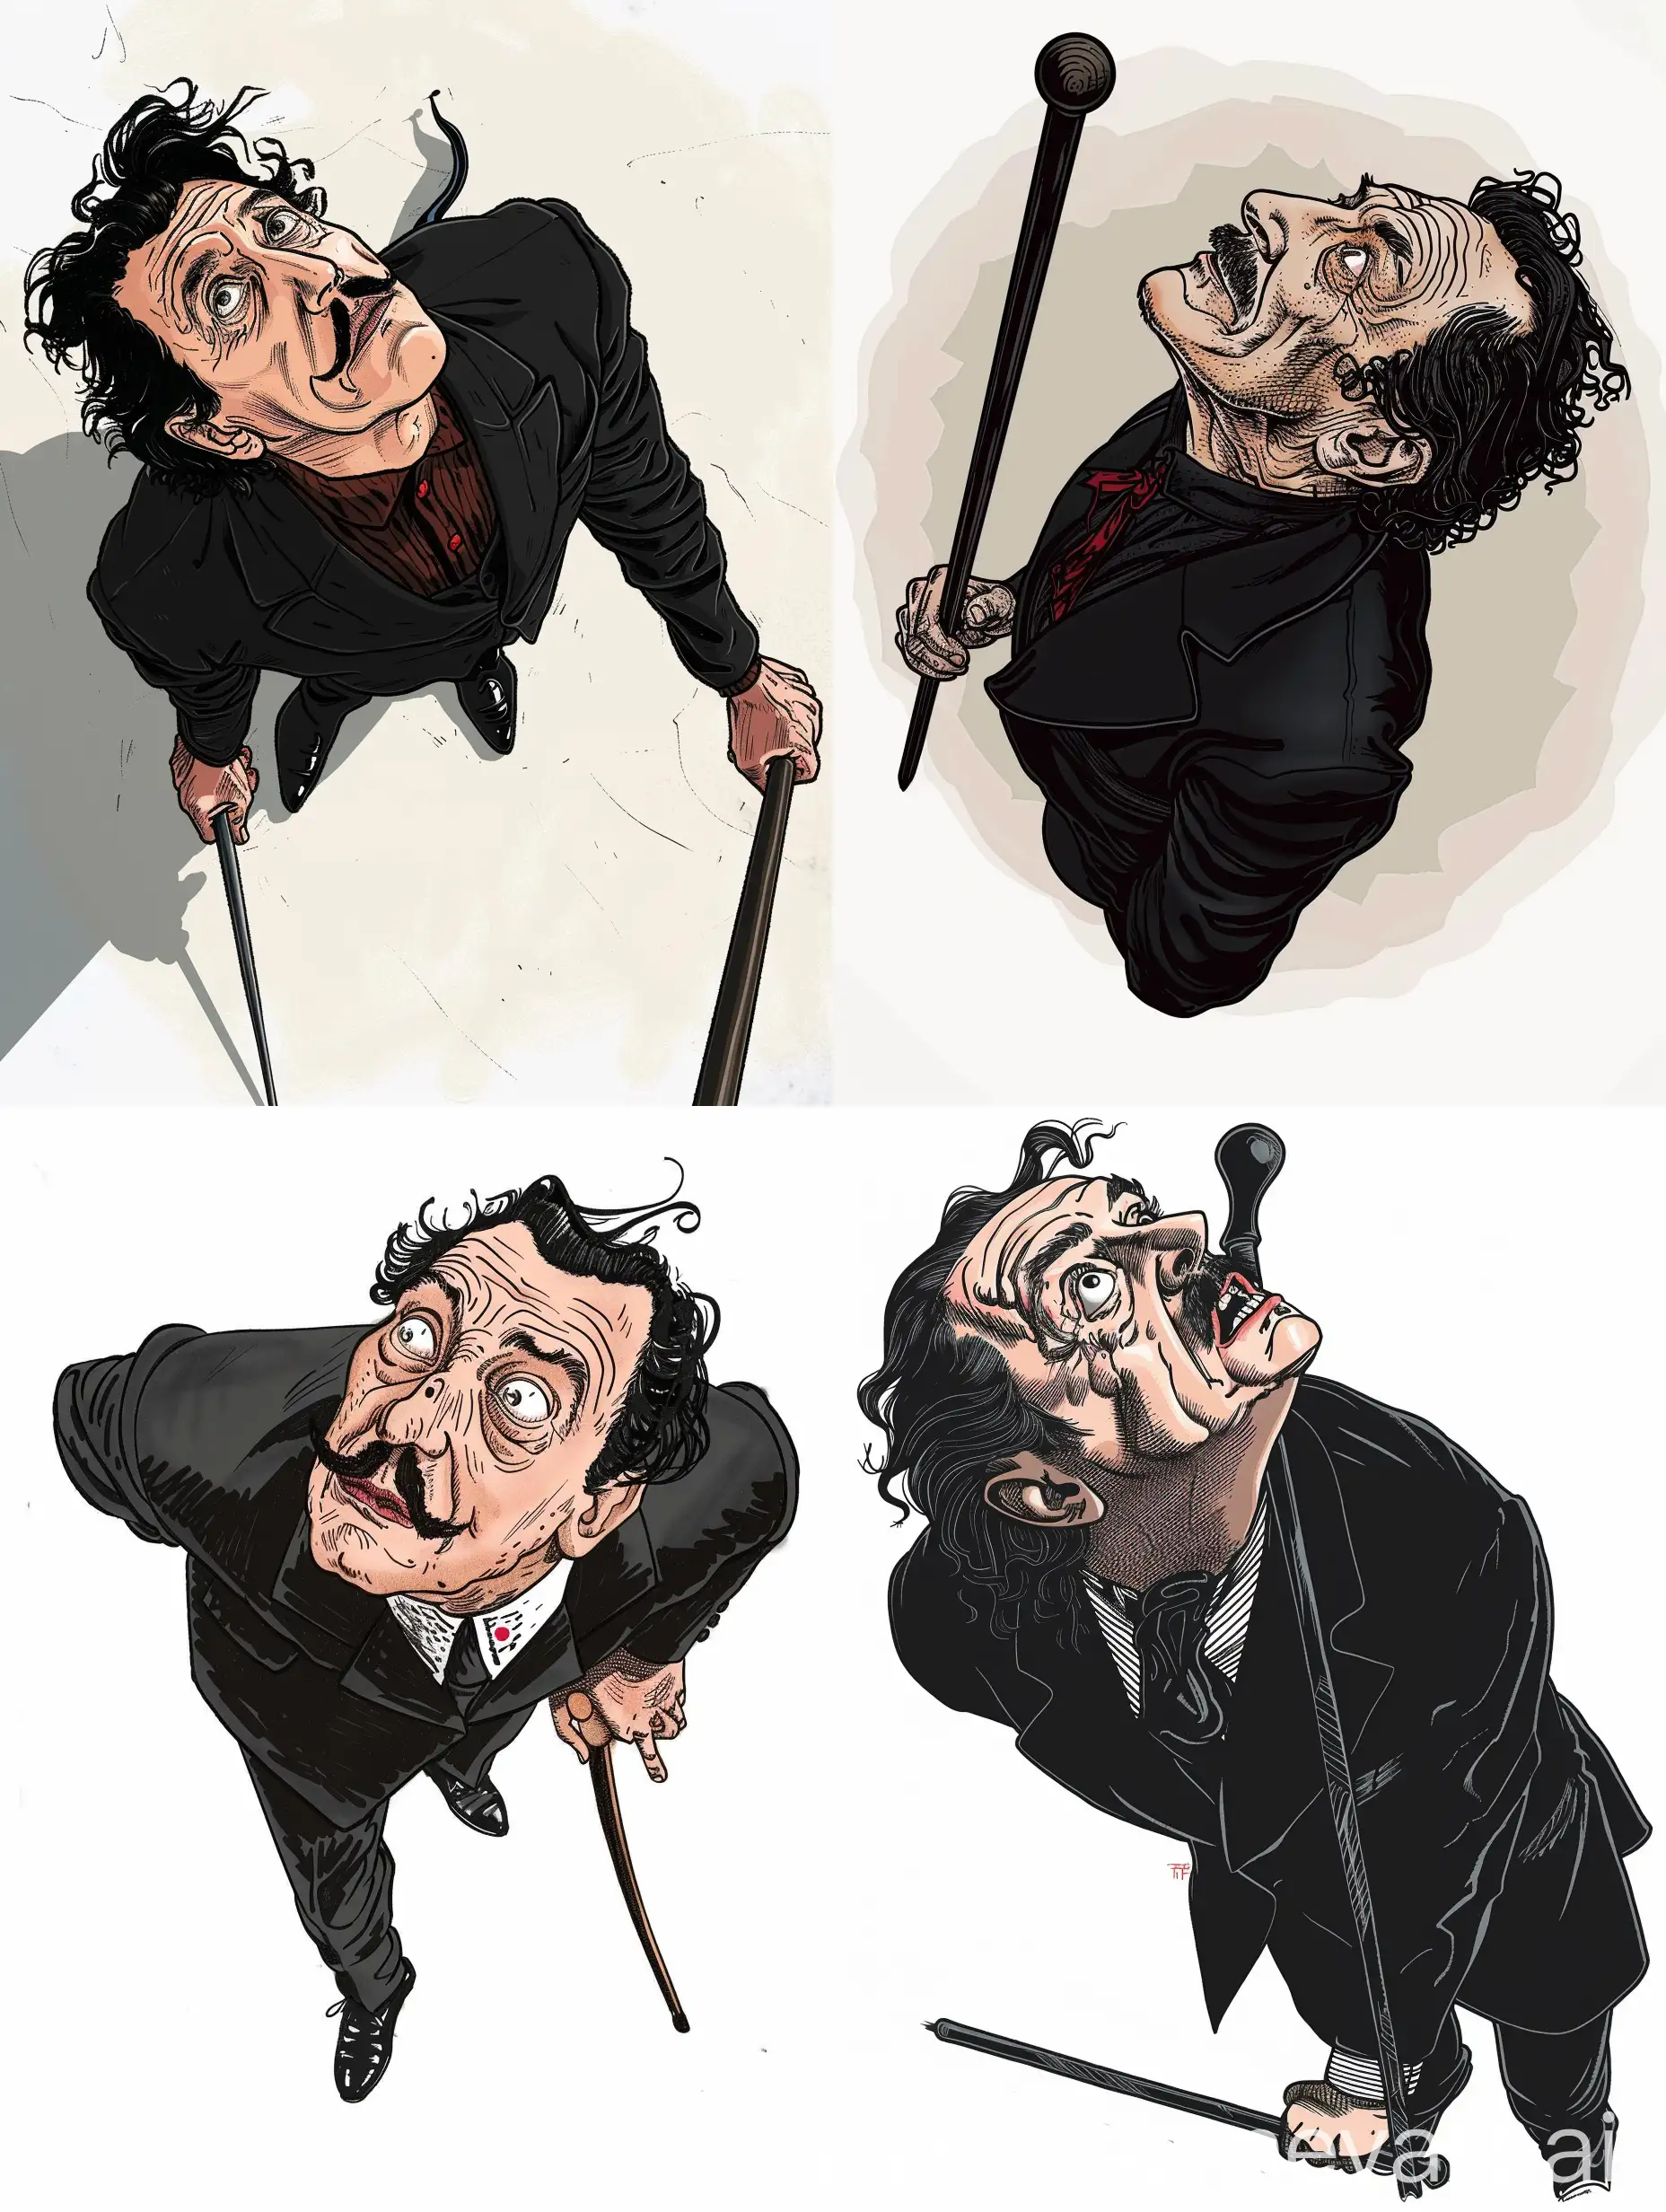 The artist Salvador Dali looks up, leans with one hand on a cane, cartoon styles, colors black, with small red accents, top view, ink, Herluf Bidstrup style